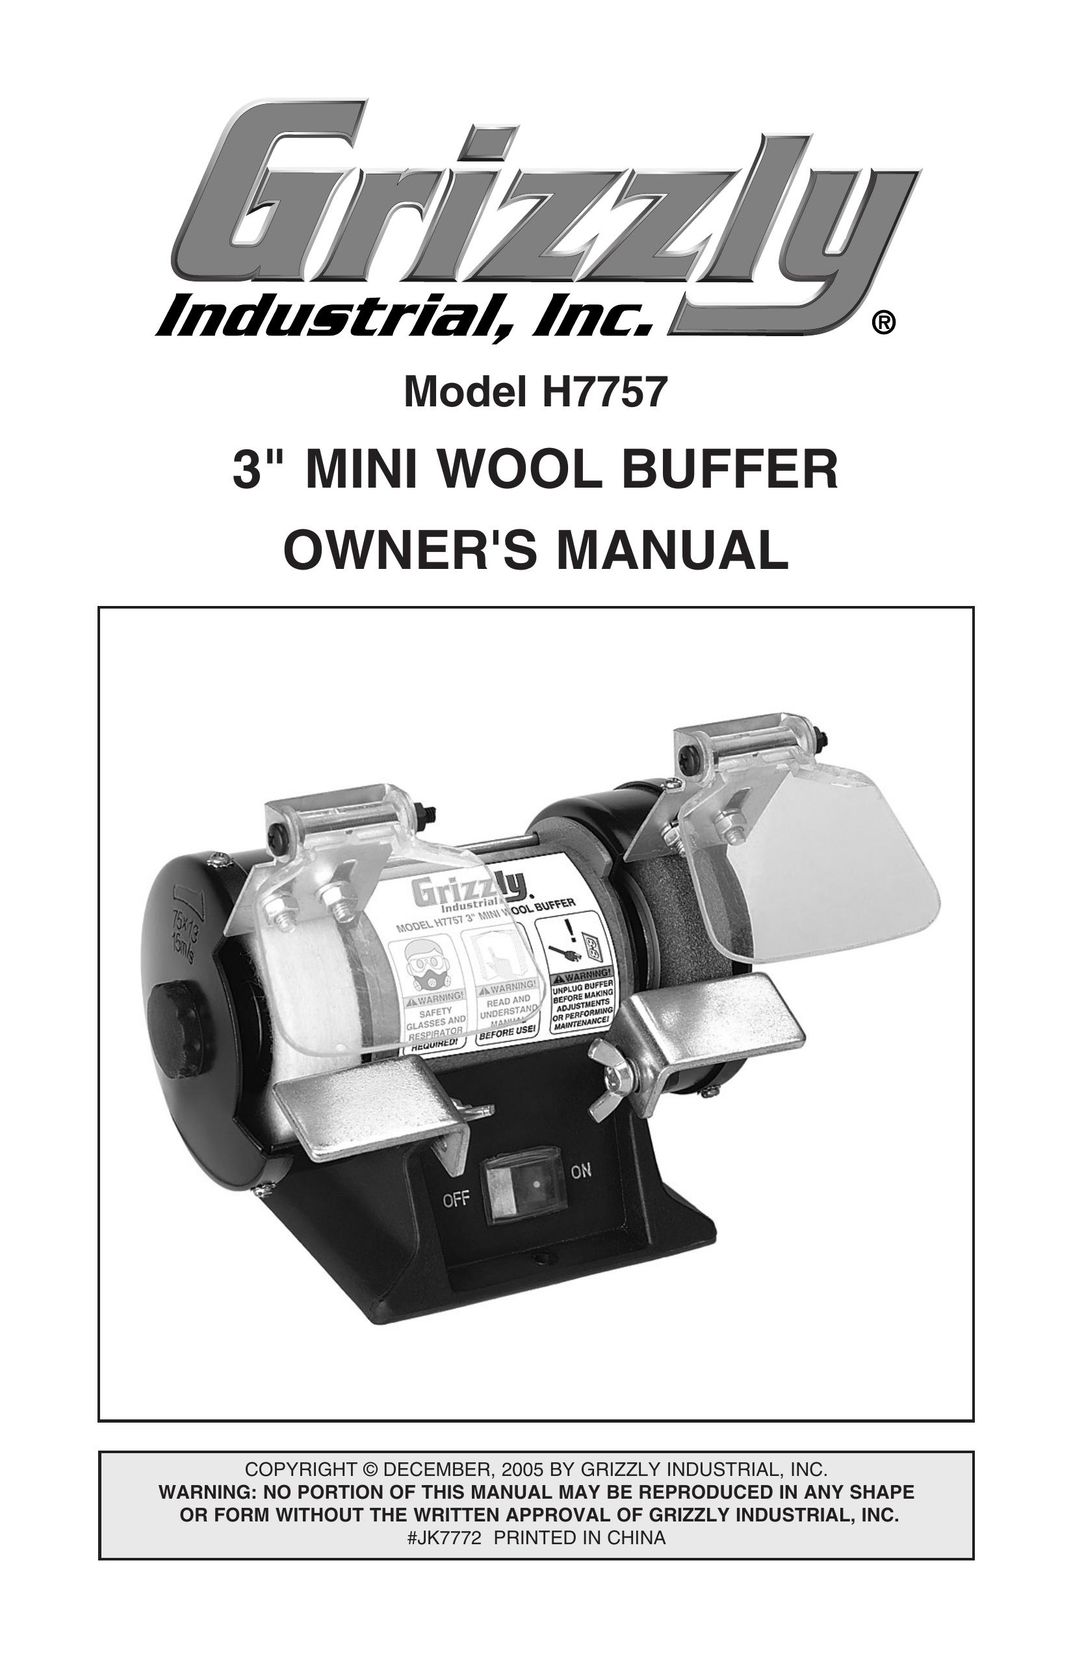 Grizzly H7757 Grinder User Manual